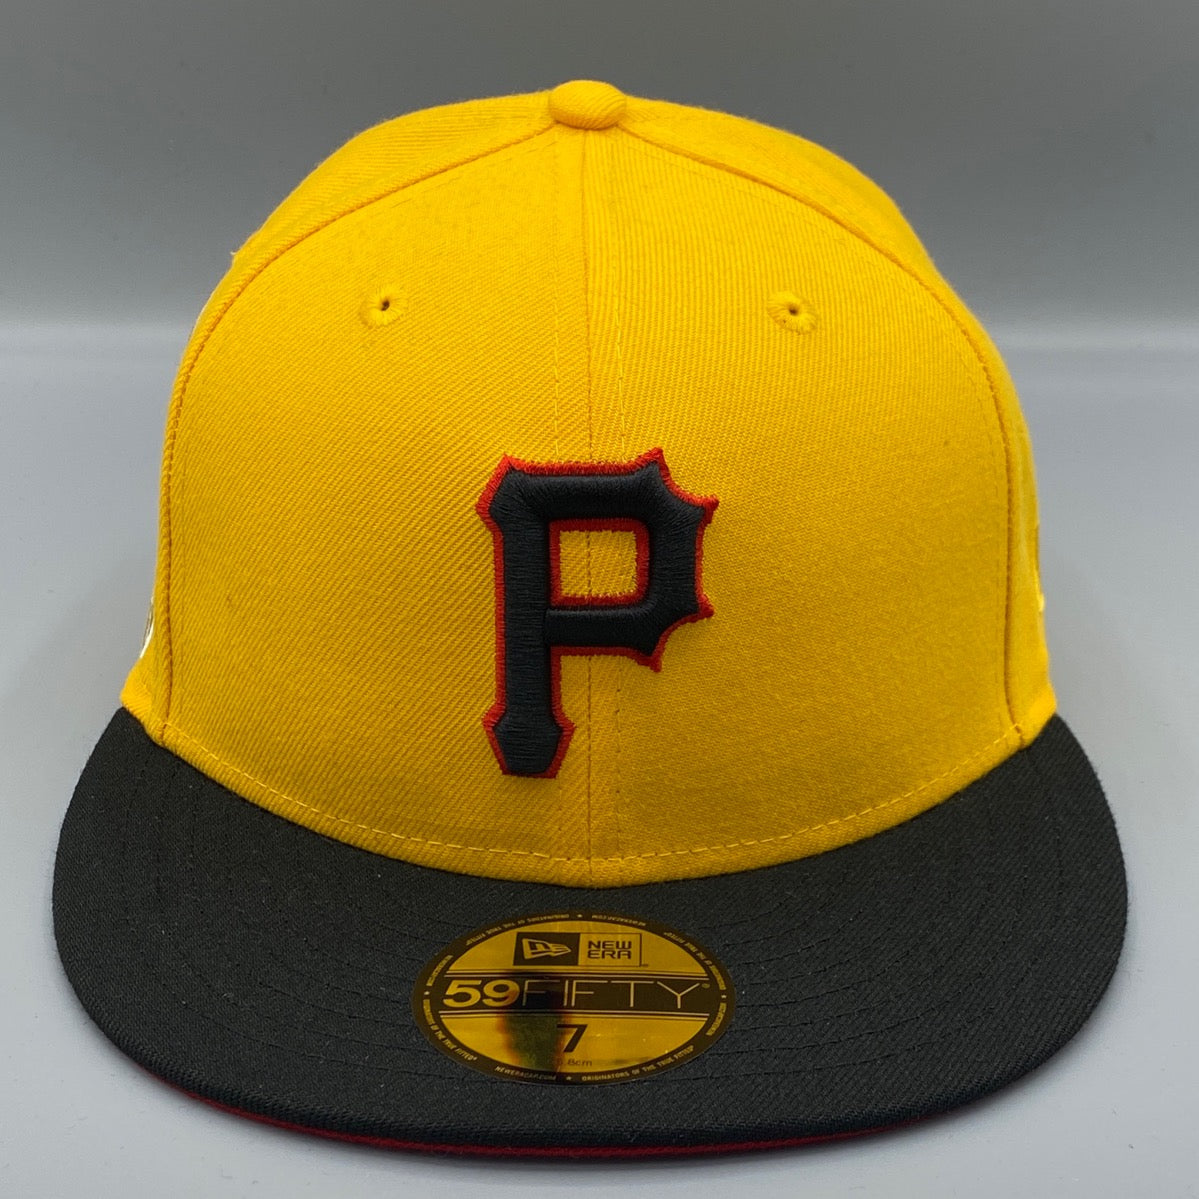 New Era Black Yellow Grey Bottom Pittsburgh Pirates 1959 All Star Game Fitted Hat 7 1/8